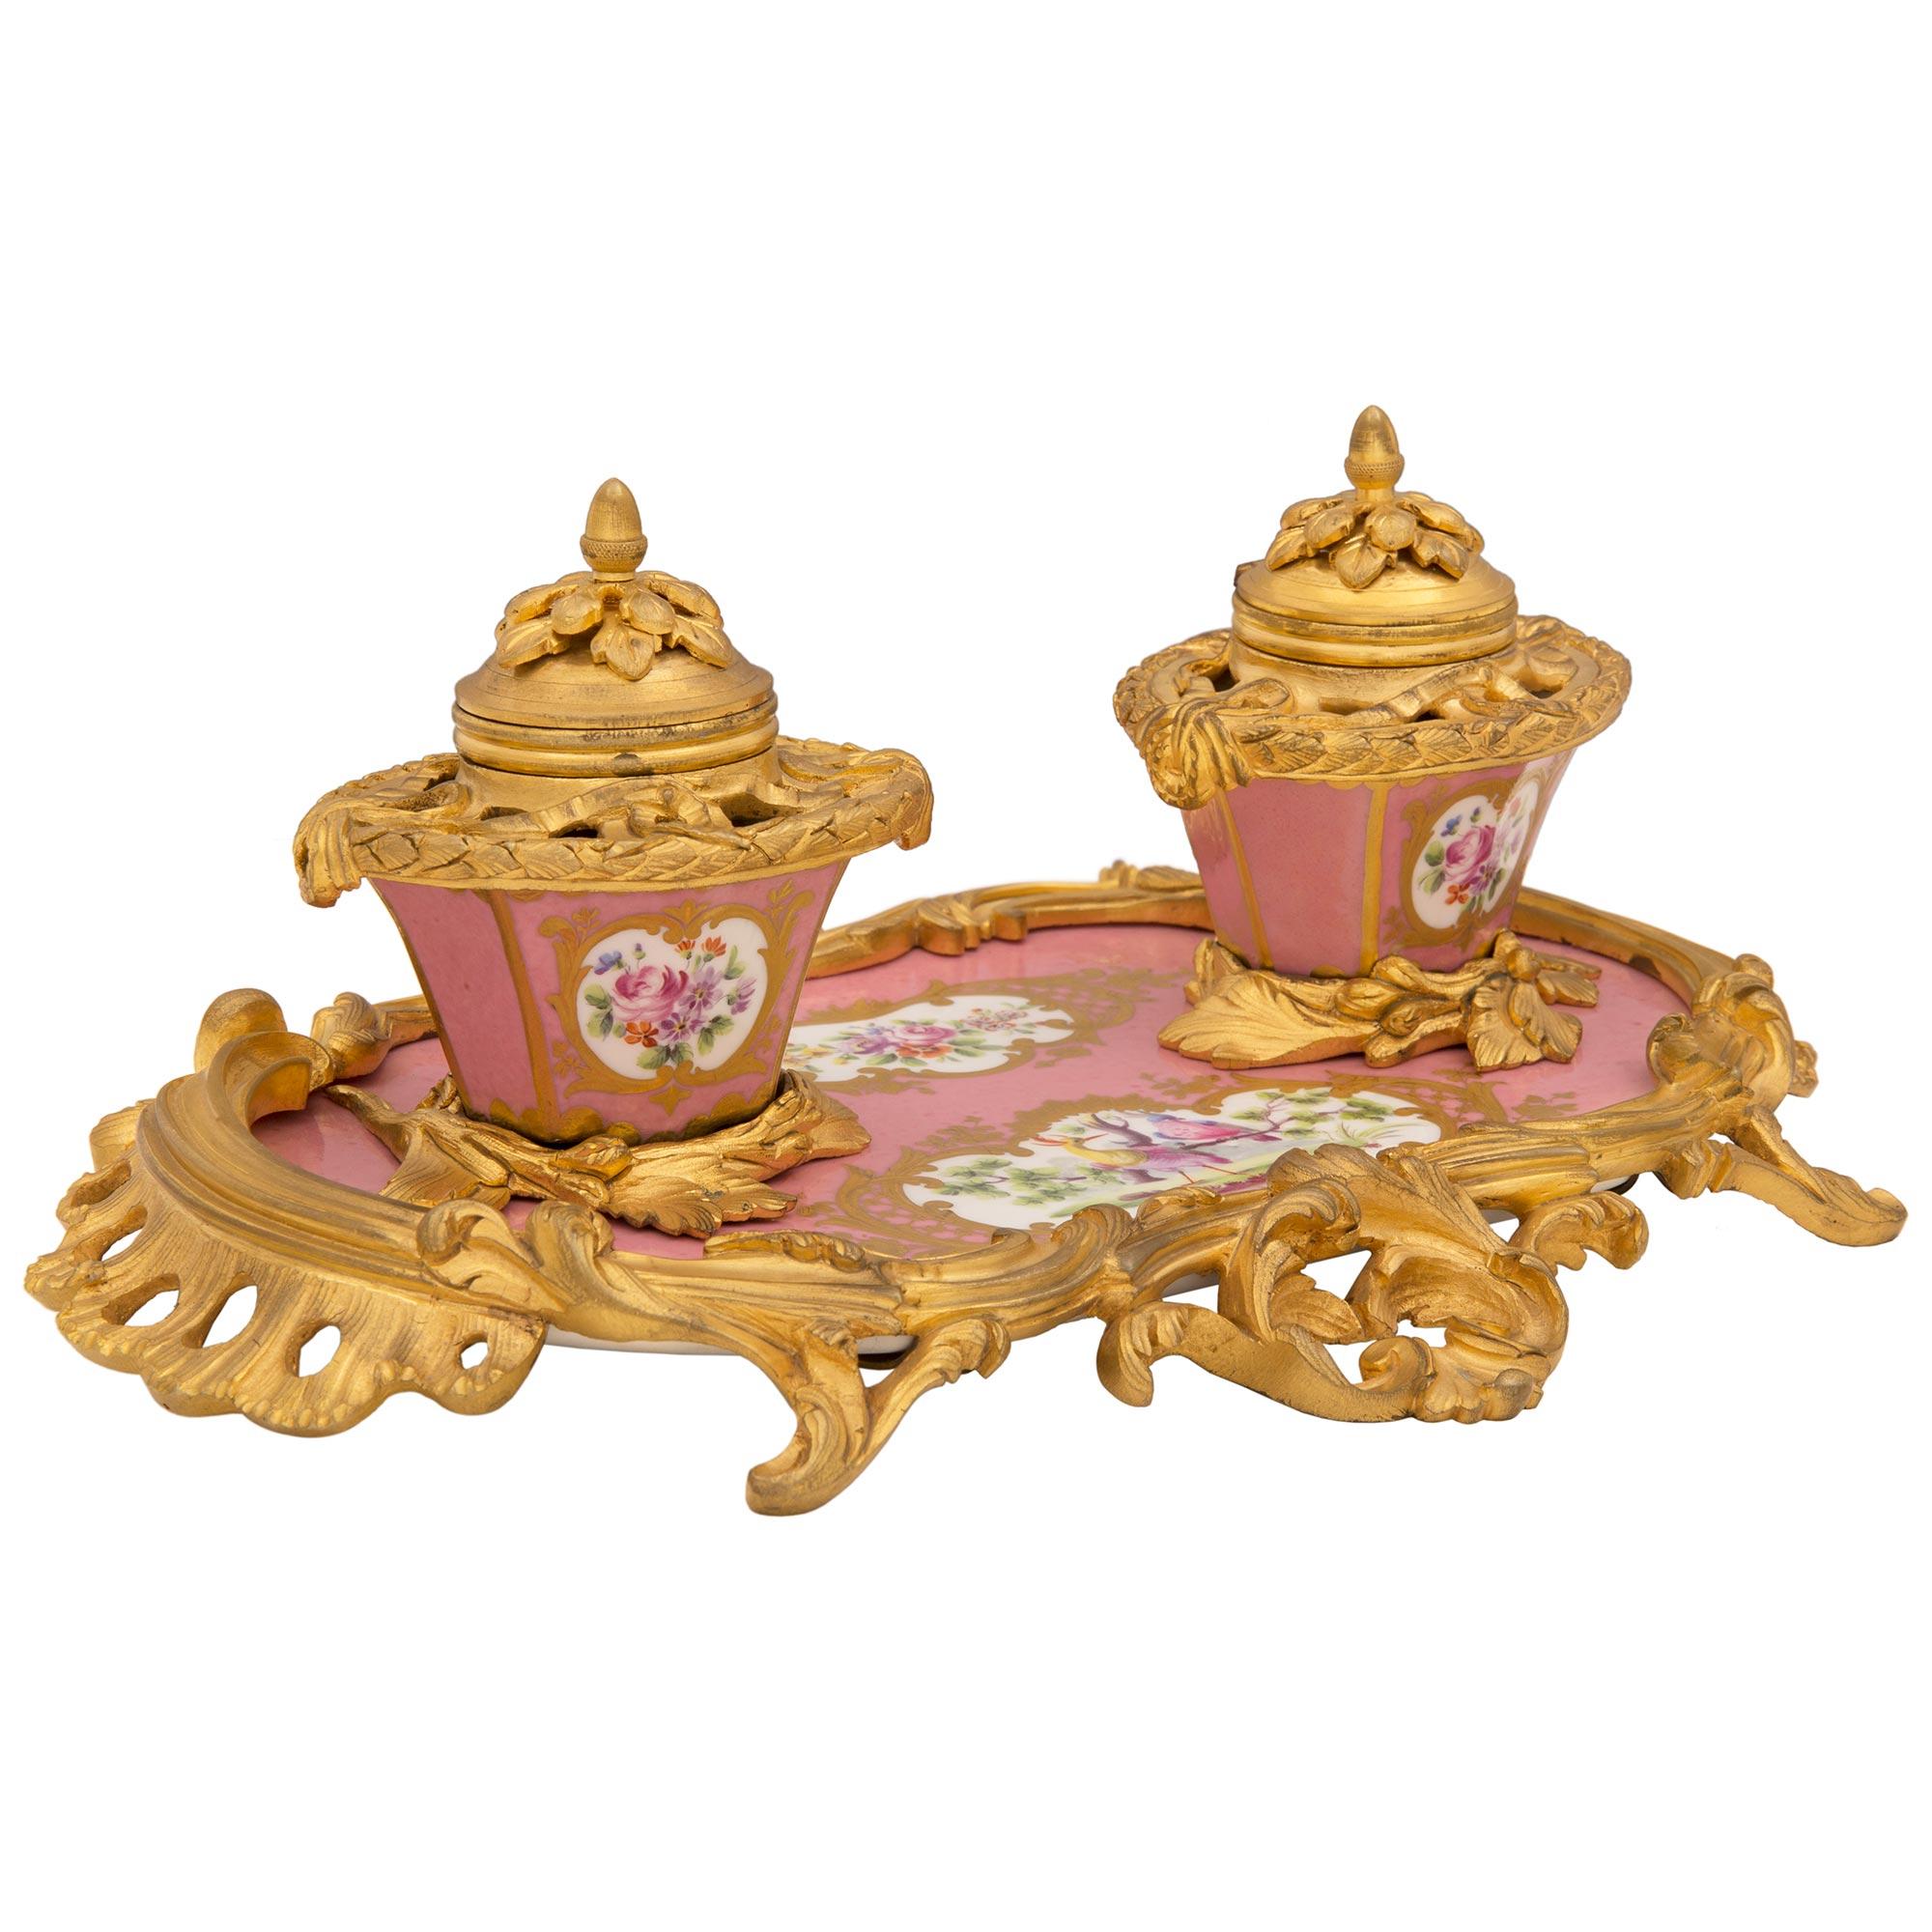  French Early 19th Century Louis XV St. Sèvres Porcelain and Ormolu Inkwell In Good Condition For Sale In West Palm Beach, FL